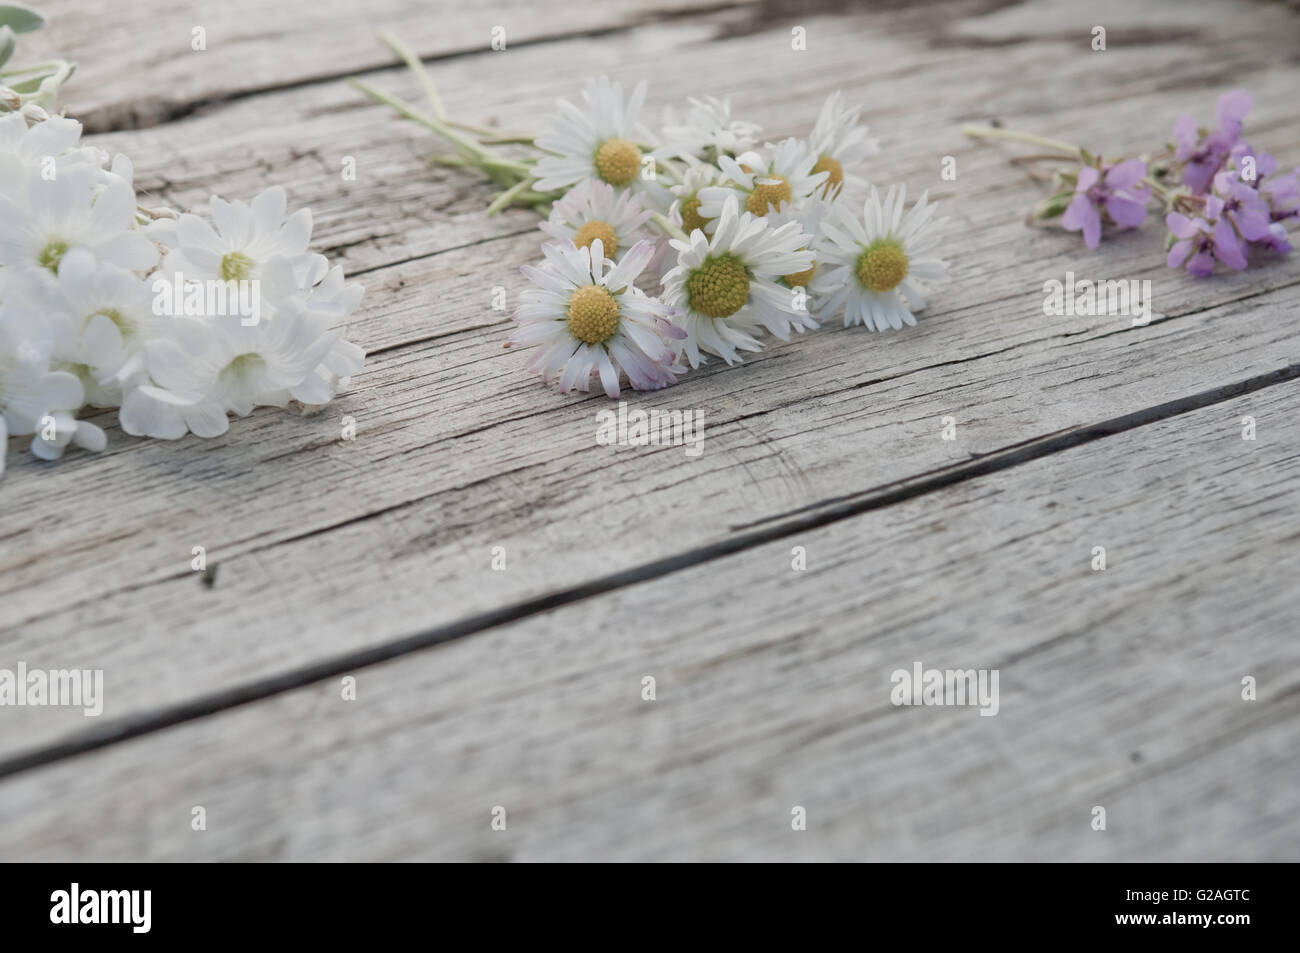 Small bunches of flowers on wooden background copy space textured surface Stock Photo